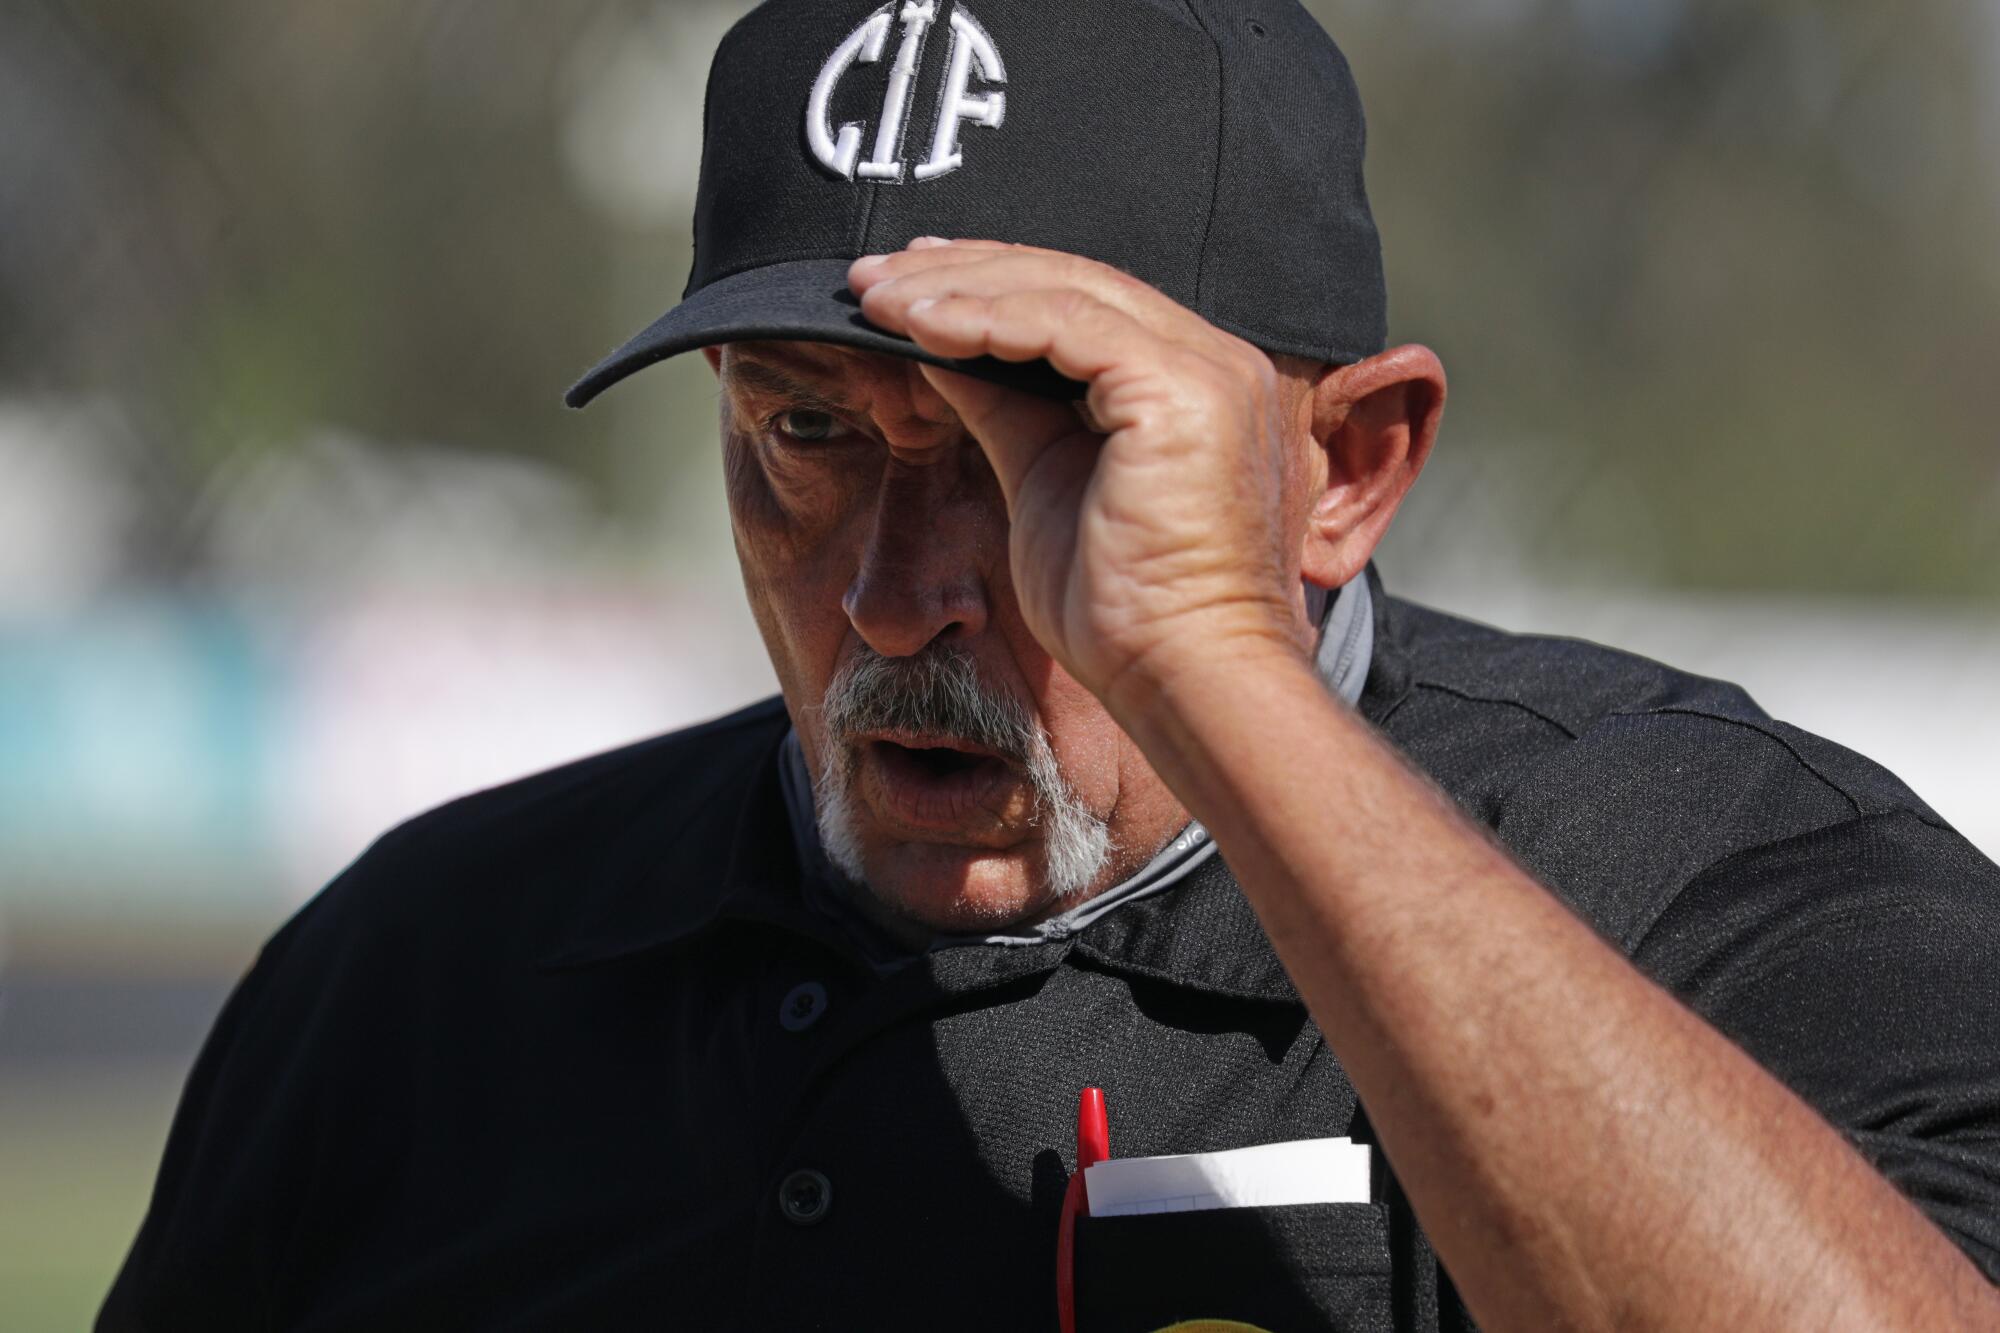 Plate umpire Jeff Sill adjusts his cap during a game between Thousand Oaks and Newbury Park.